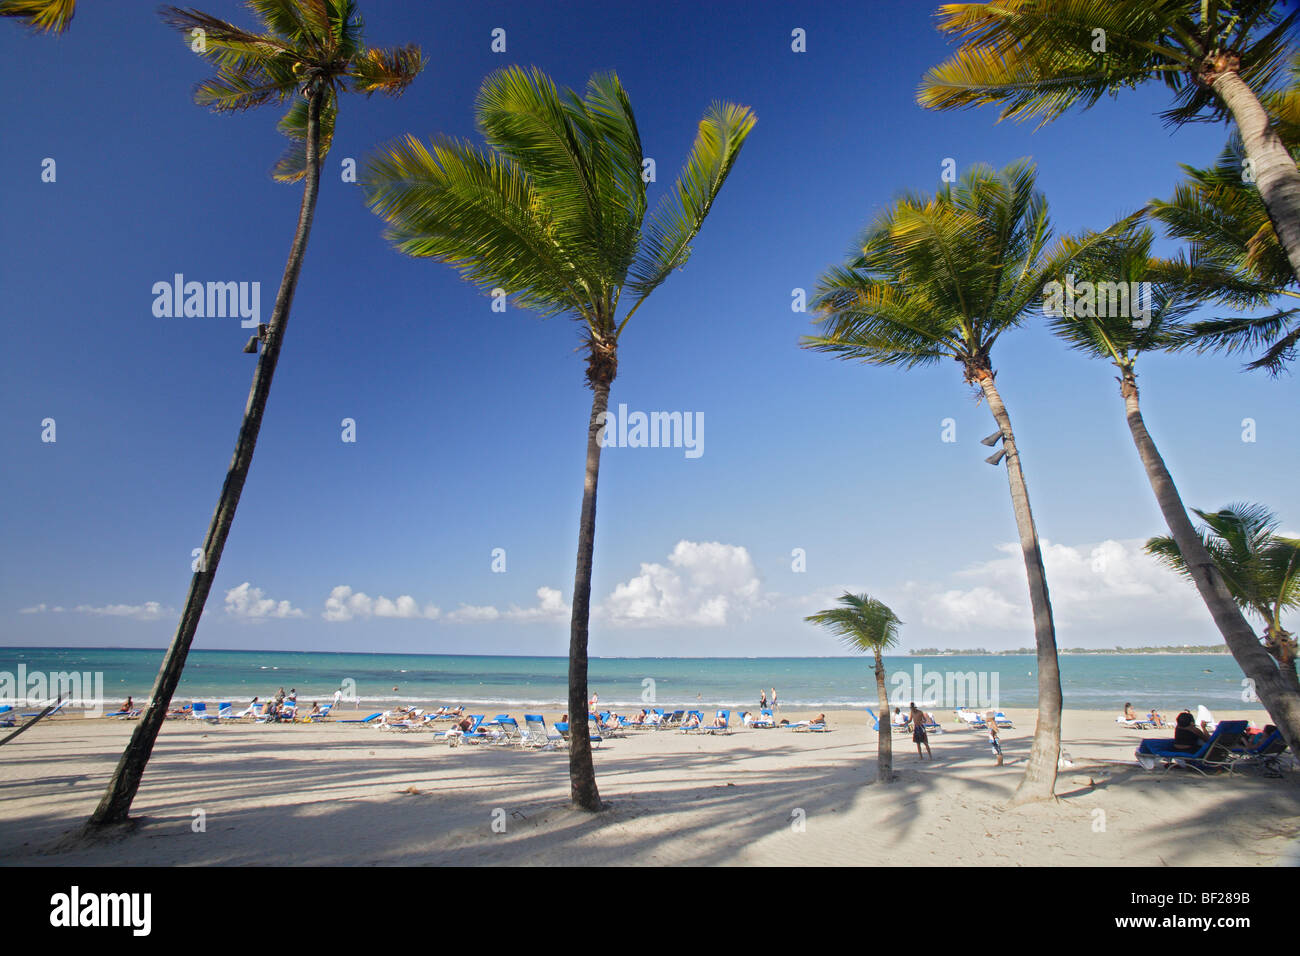 People and palm trees at the beach under blue sky, Isla Verde, Puerto Rico, Carribean, America Stock Photo